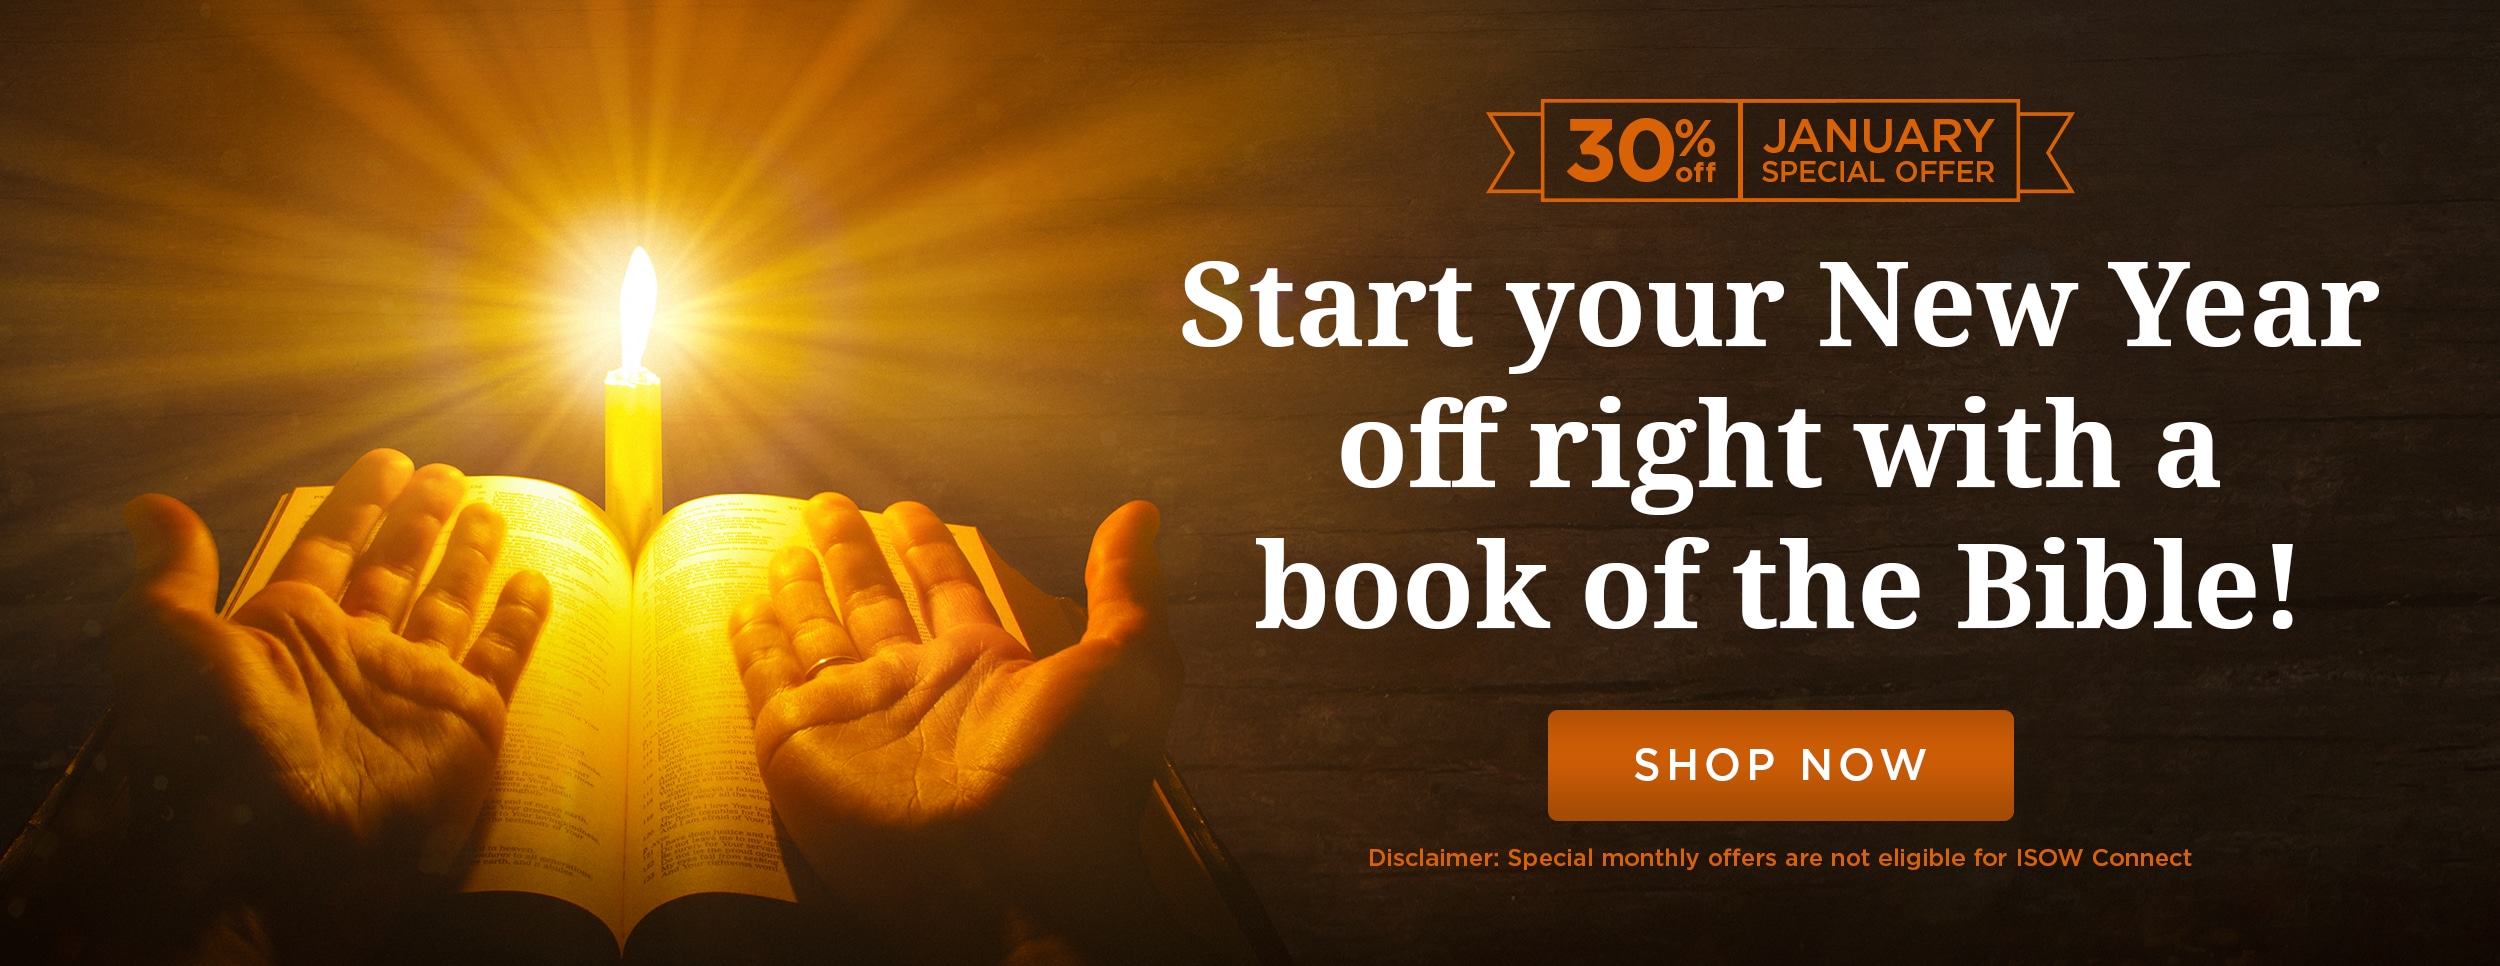 Books-of-the-Bible—Website-Banner